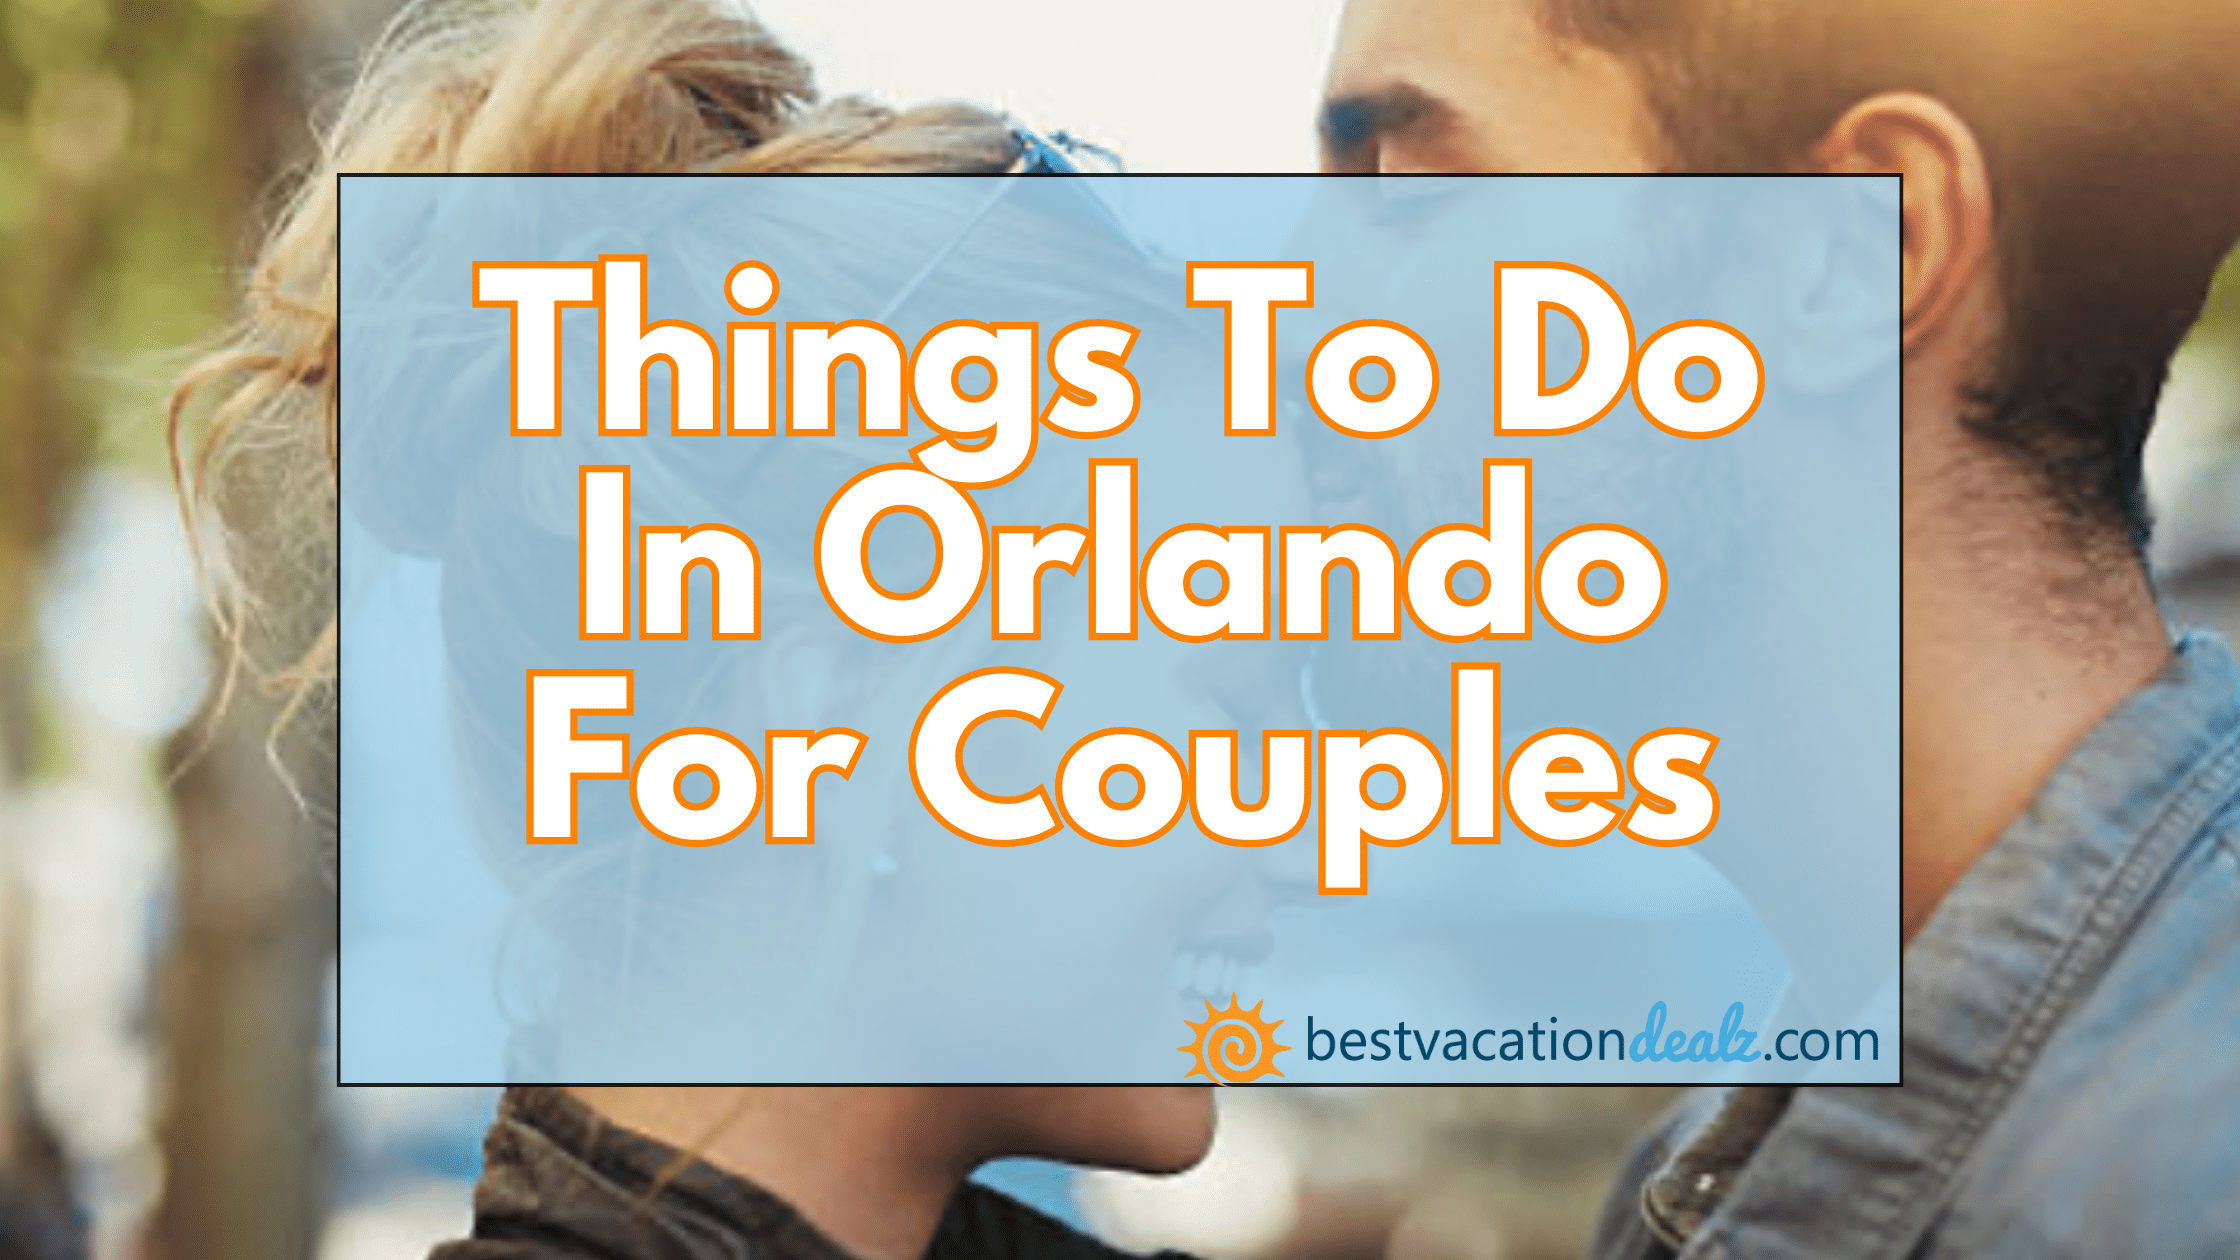 things to do in Orlando for couples by best vacation deallz blog banner with a couple in the background